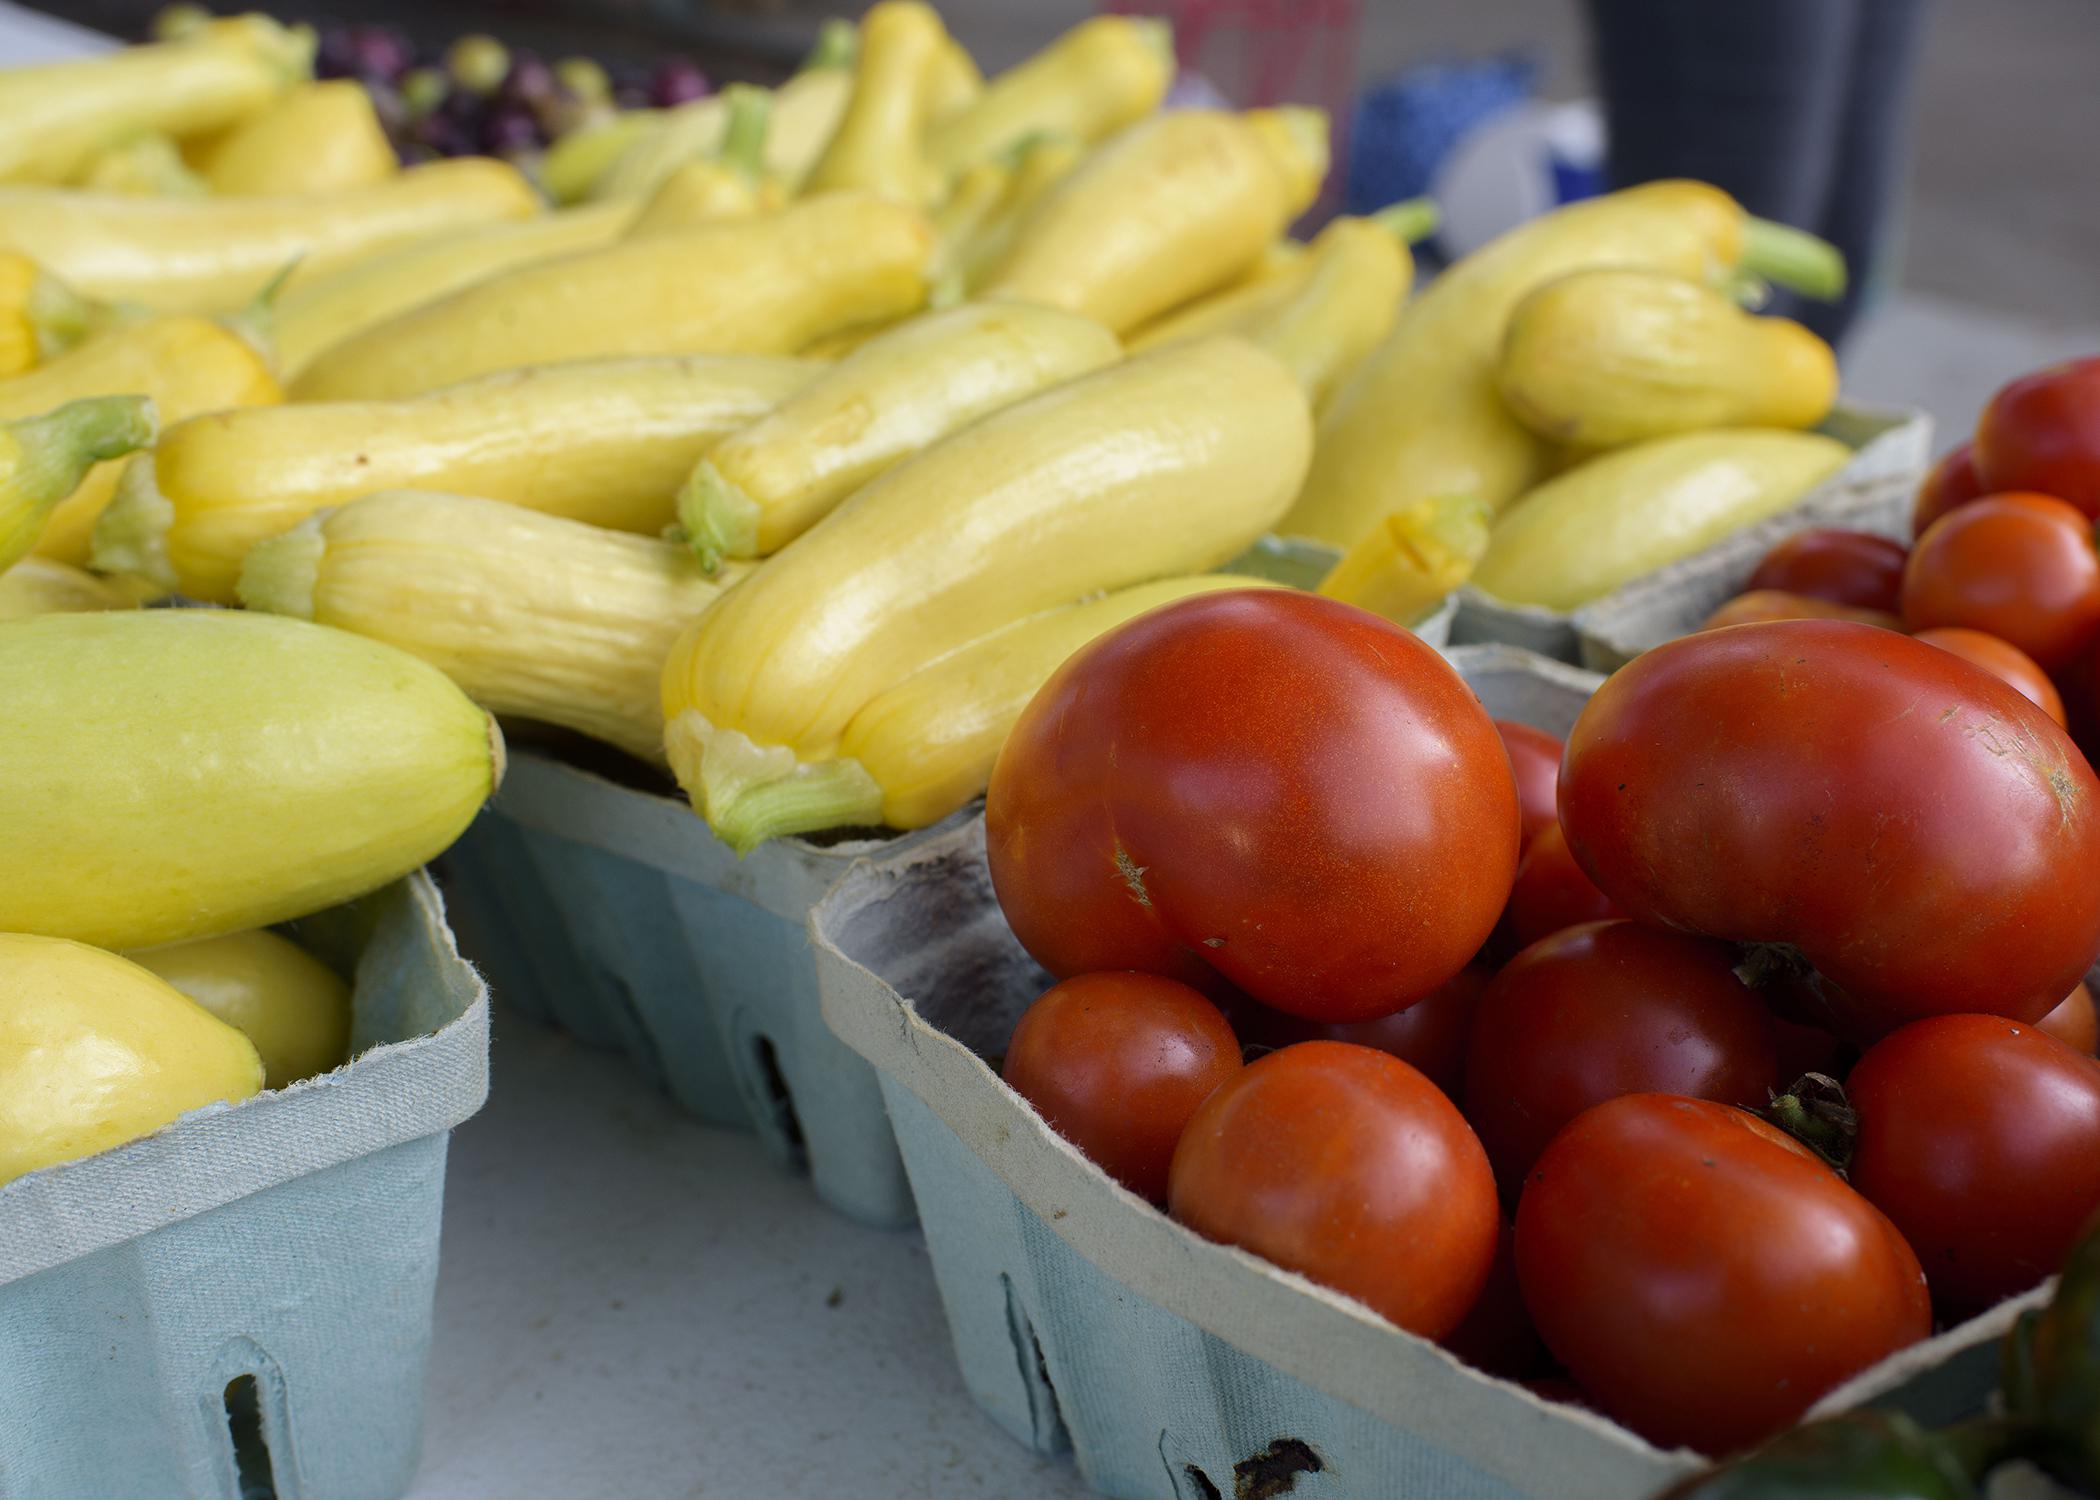 Close up of tomatoes and yellow squash in farmers market baskets.